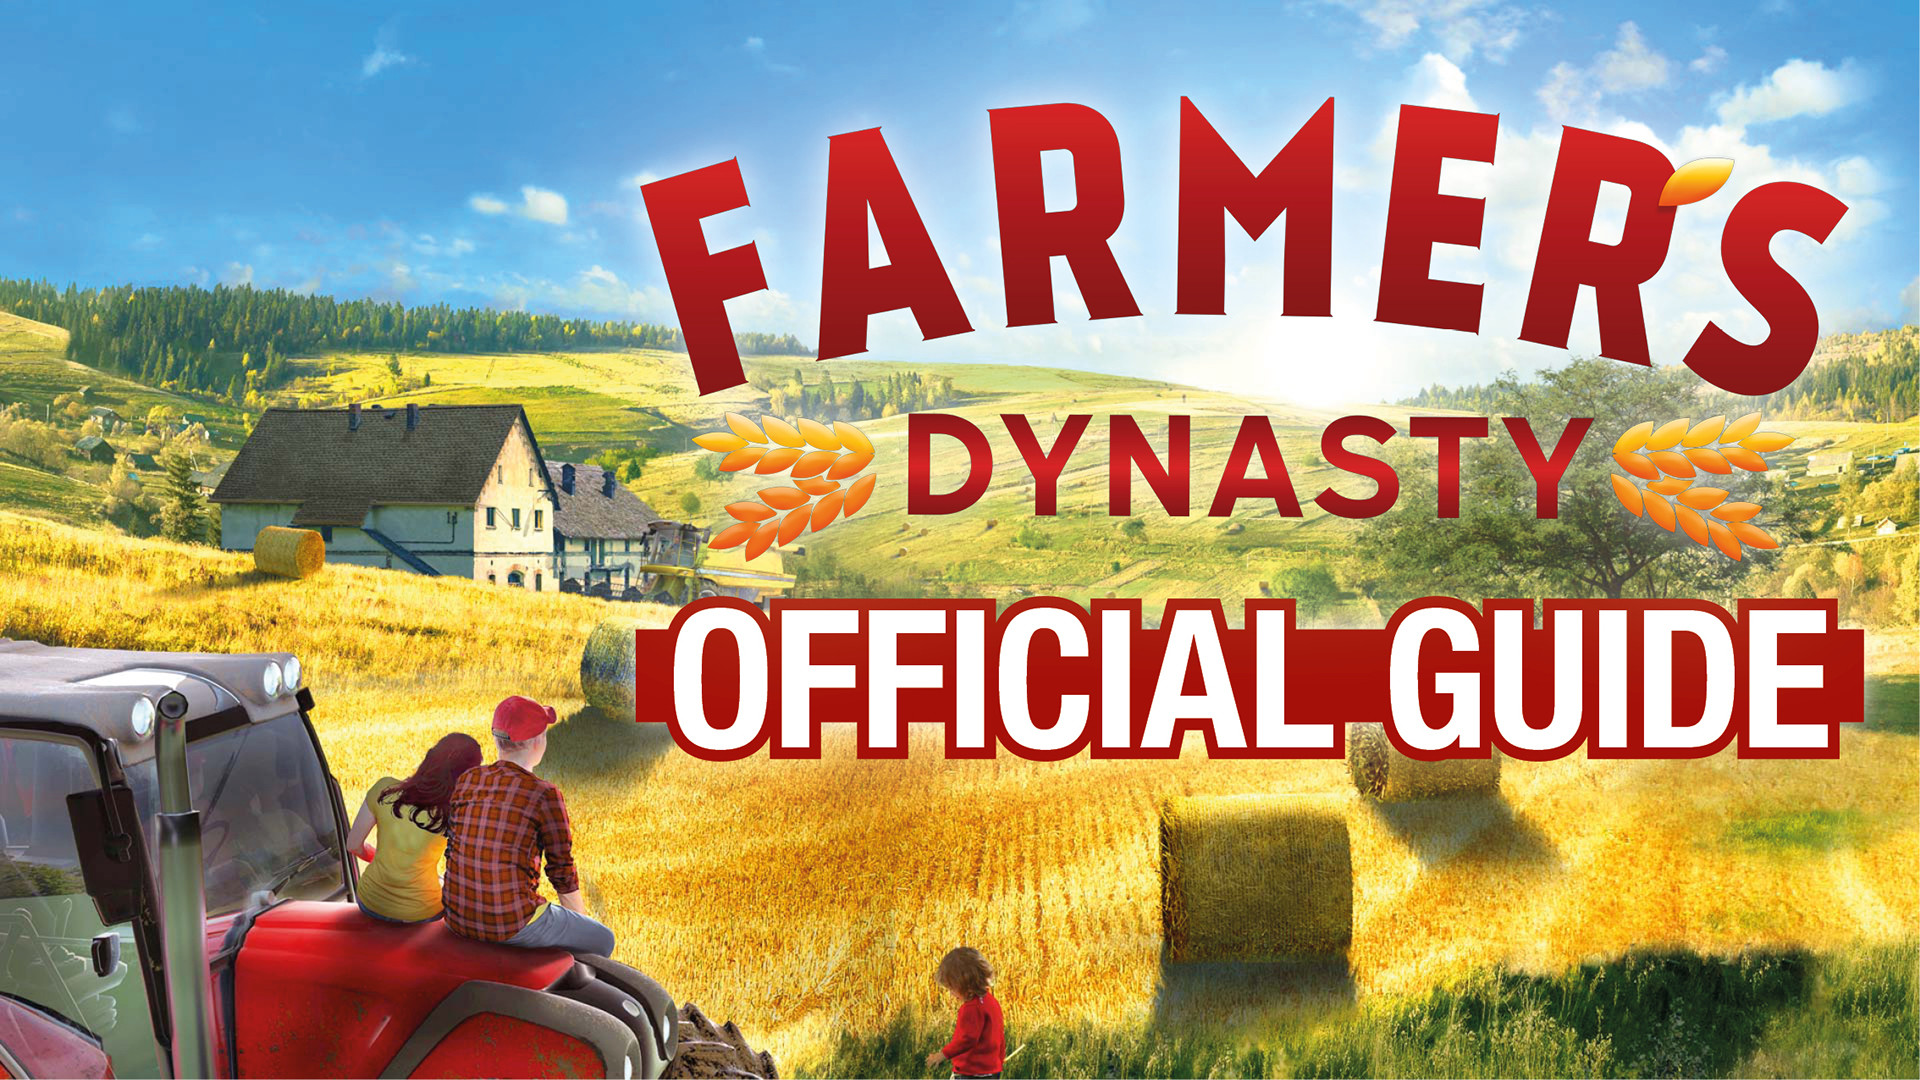 Farmer’s Dynasty - Official Guide Featured Screenshot #1